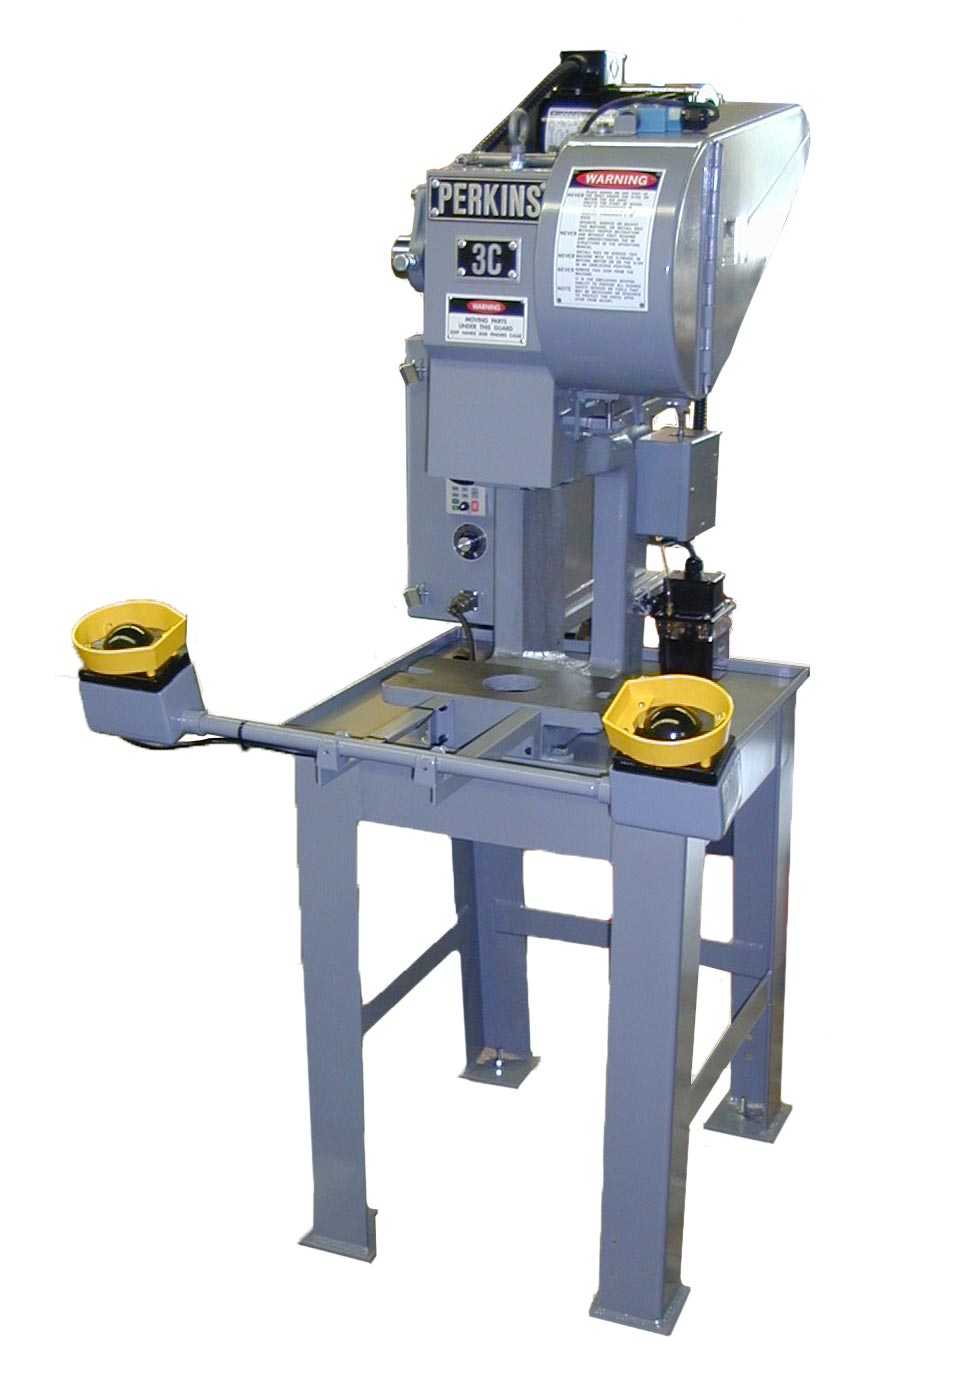 Perkins Power Stamping 3C Press with Pin Clutch